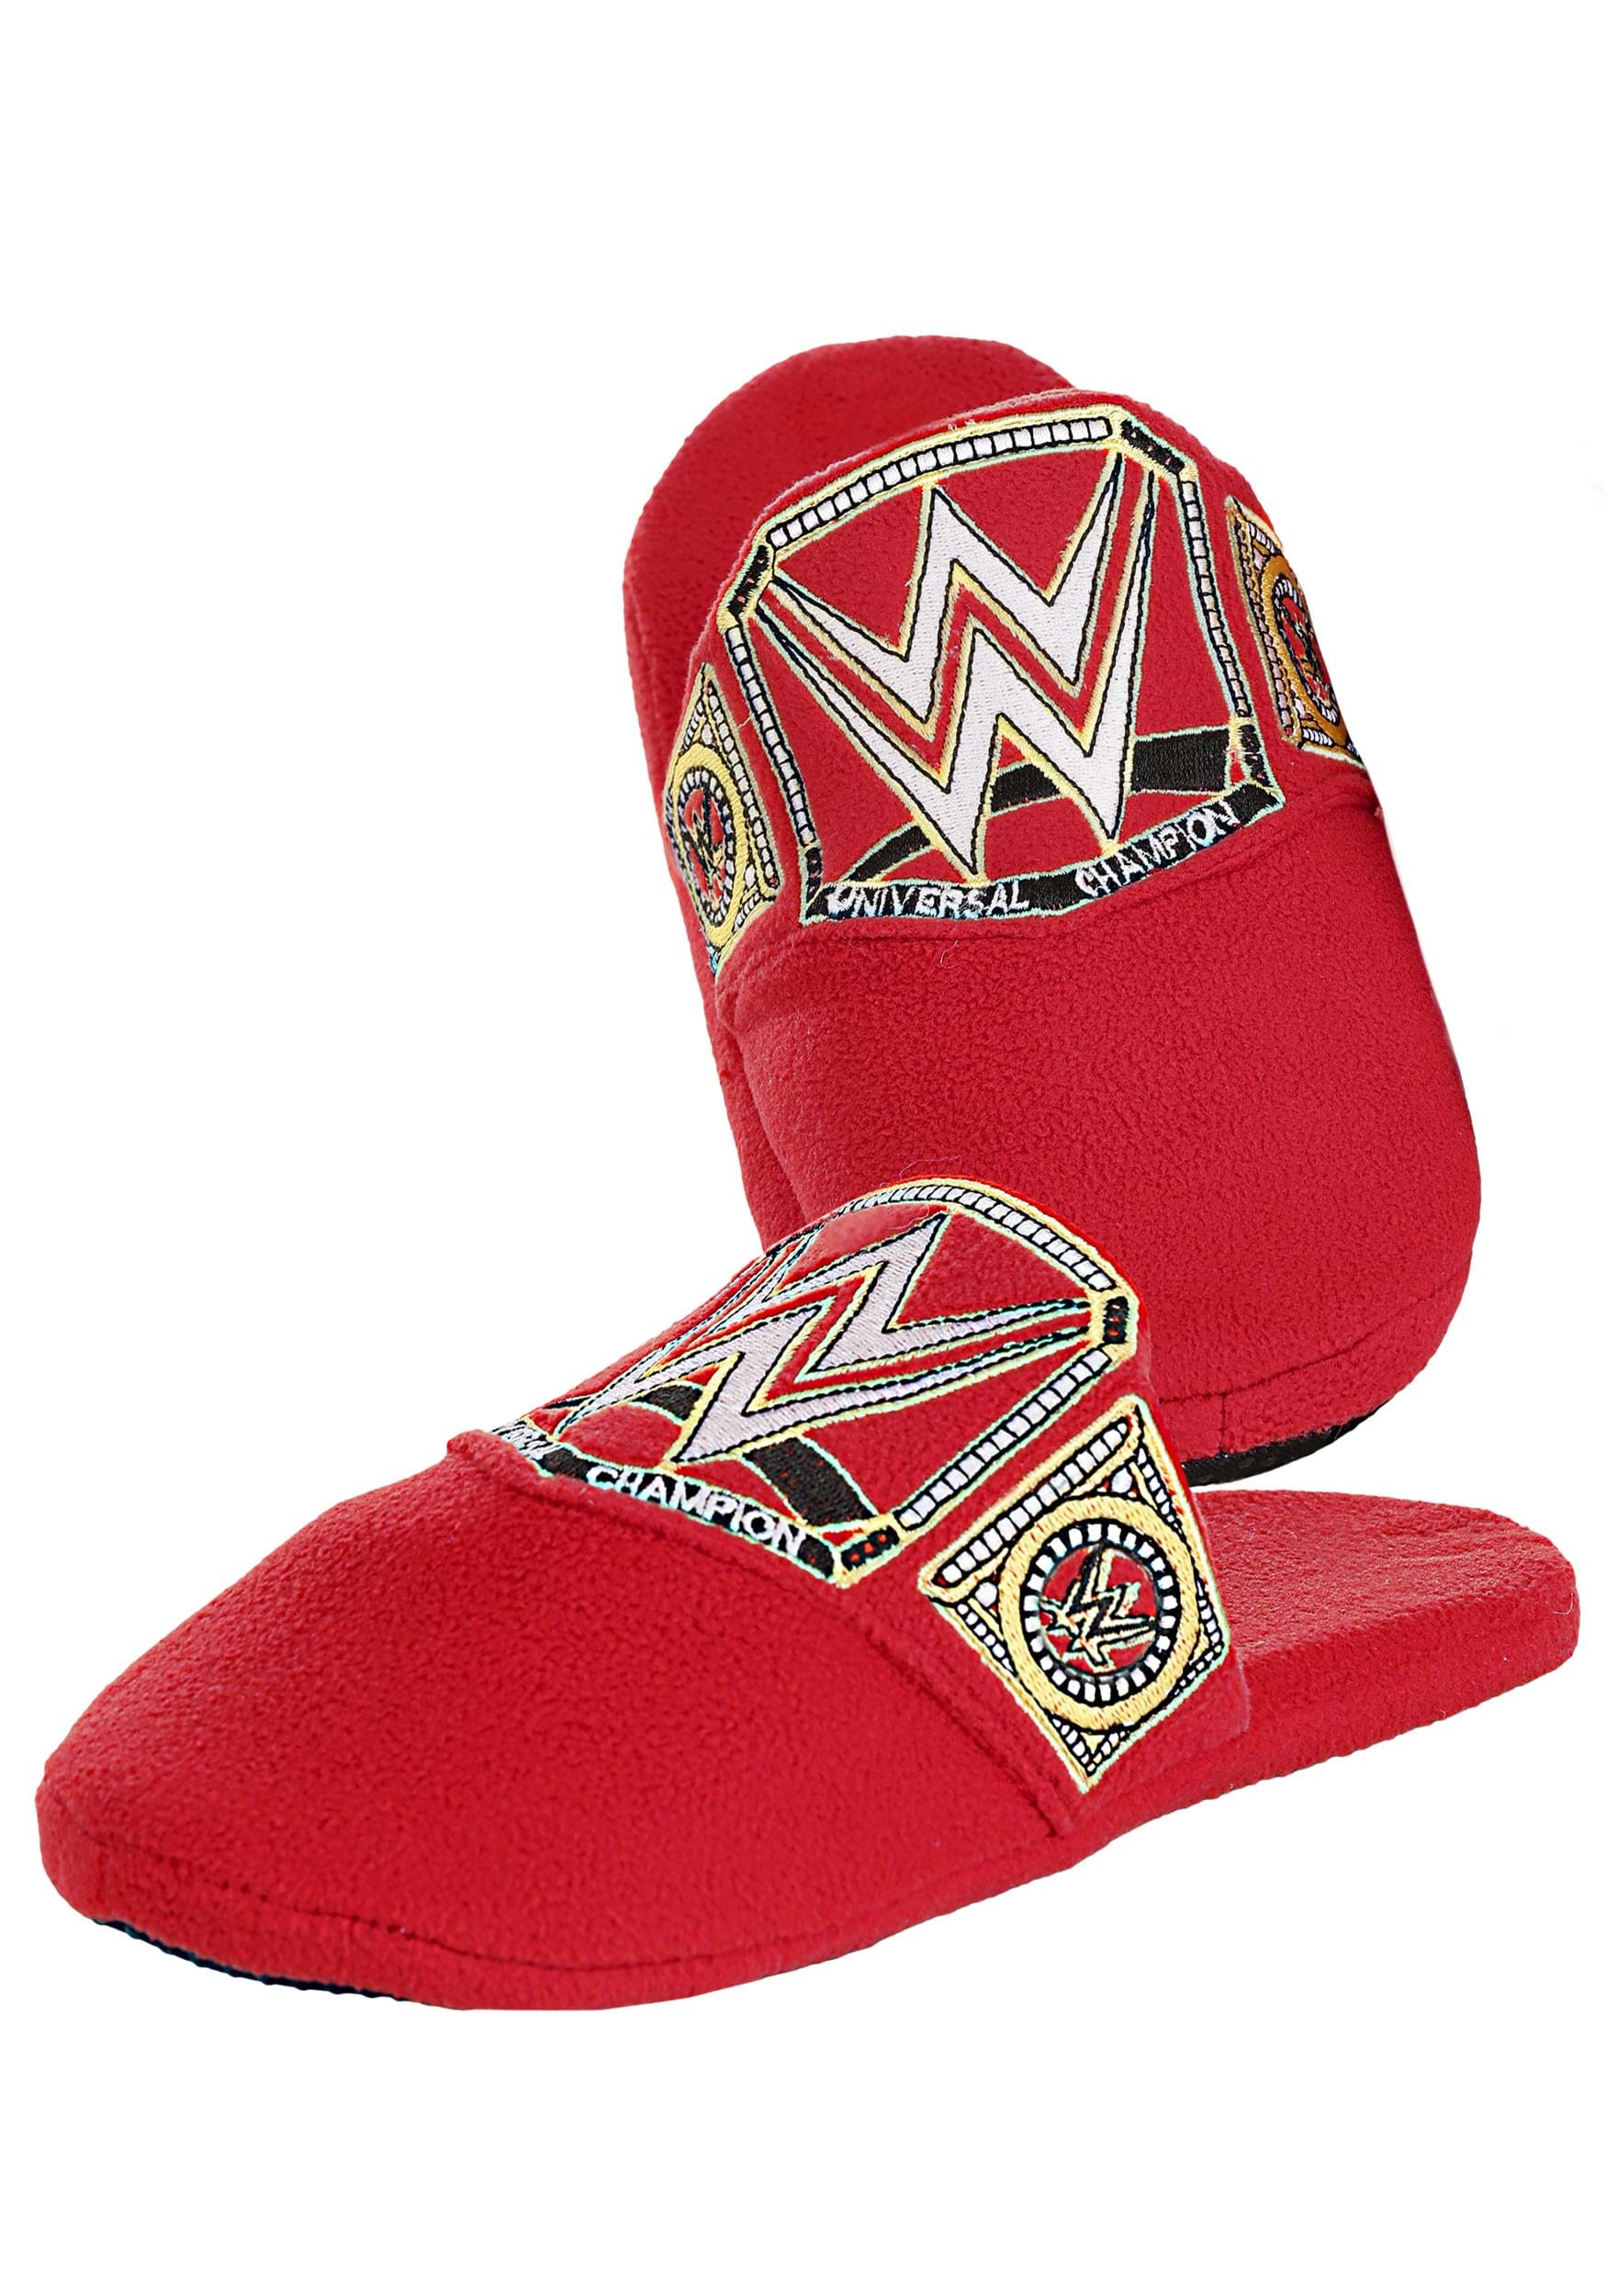 WWE Championship Adult Slippers